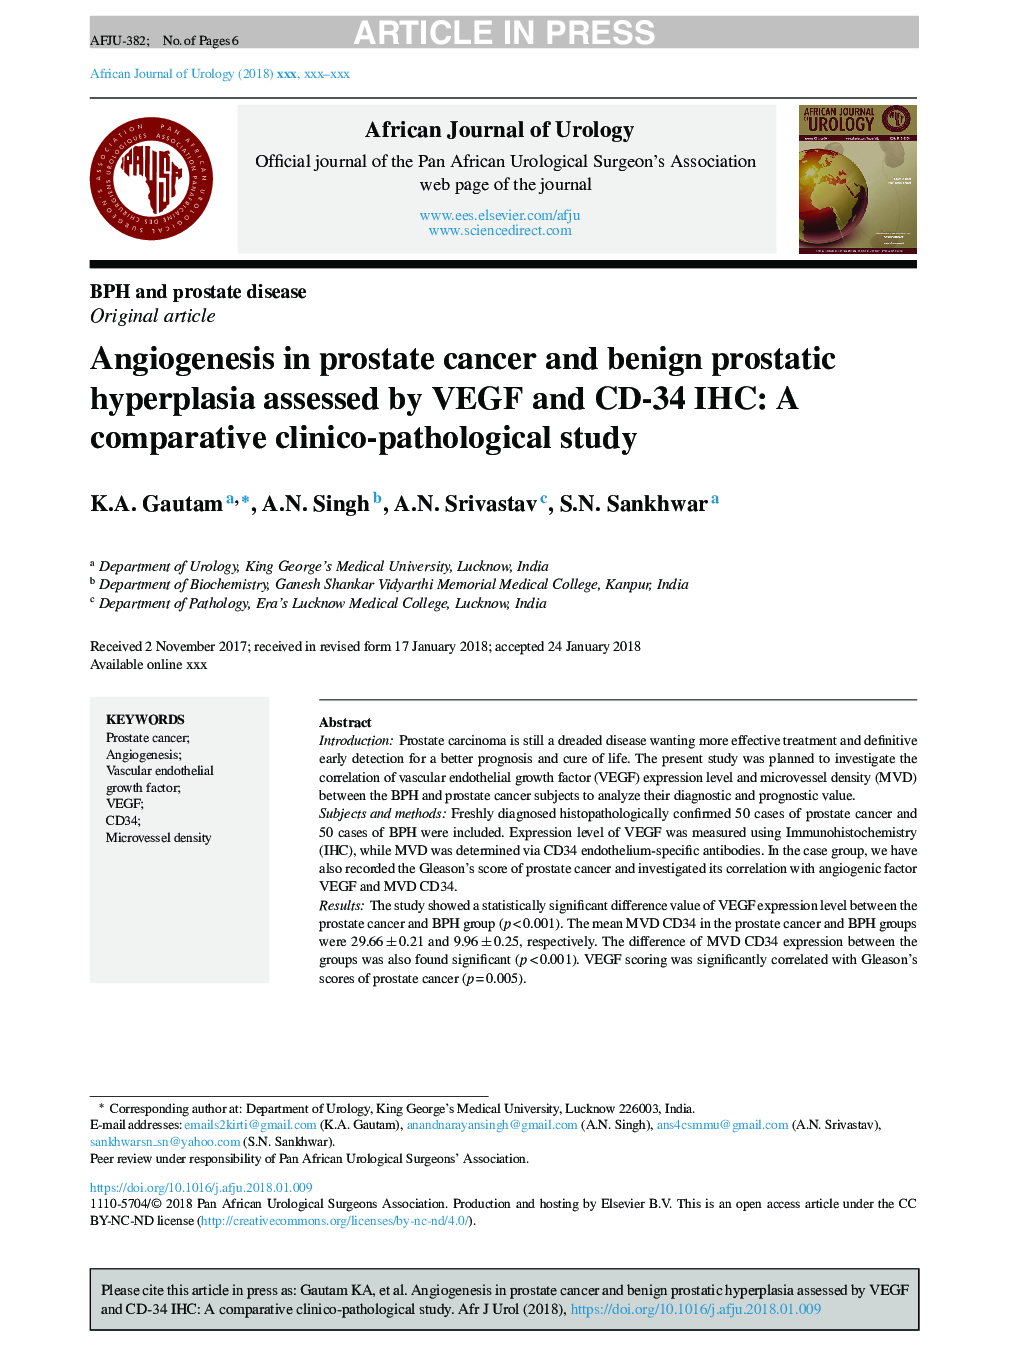 Angiogenesis in prostate cancer and benign prostatic hyperplasia assessed by VEGF and CD-34 IHC: A comparative clinico-pathological study